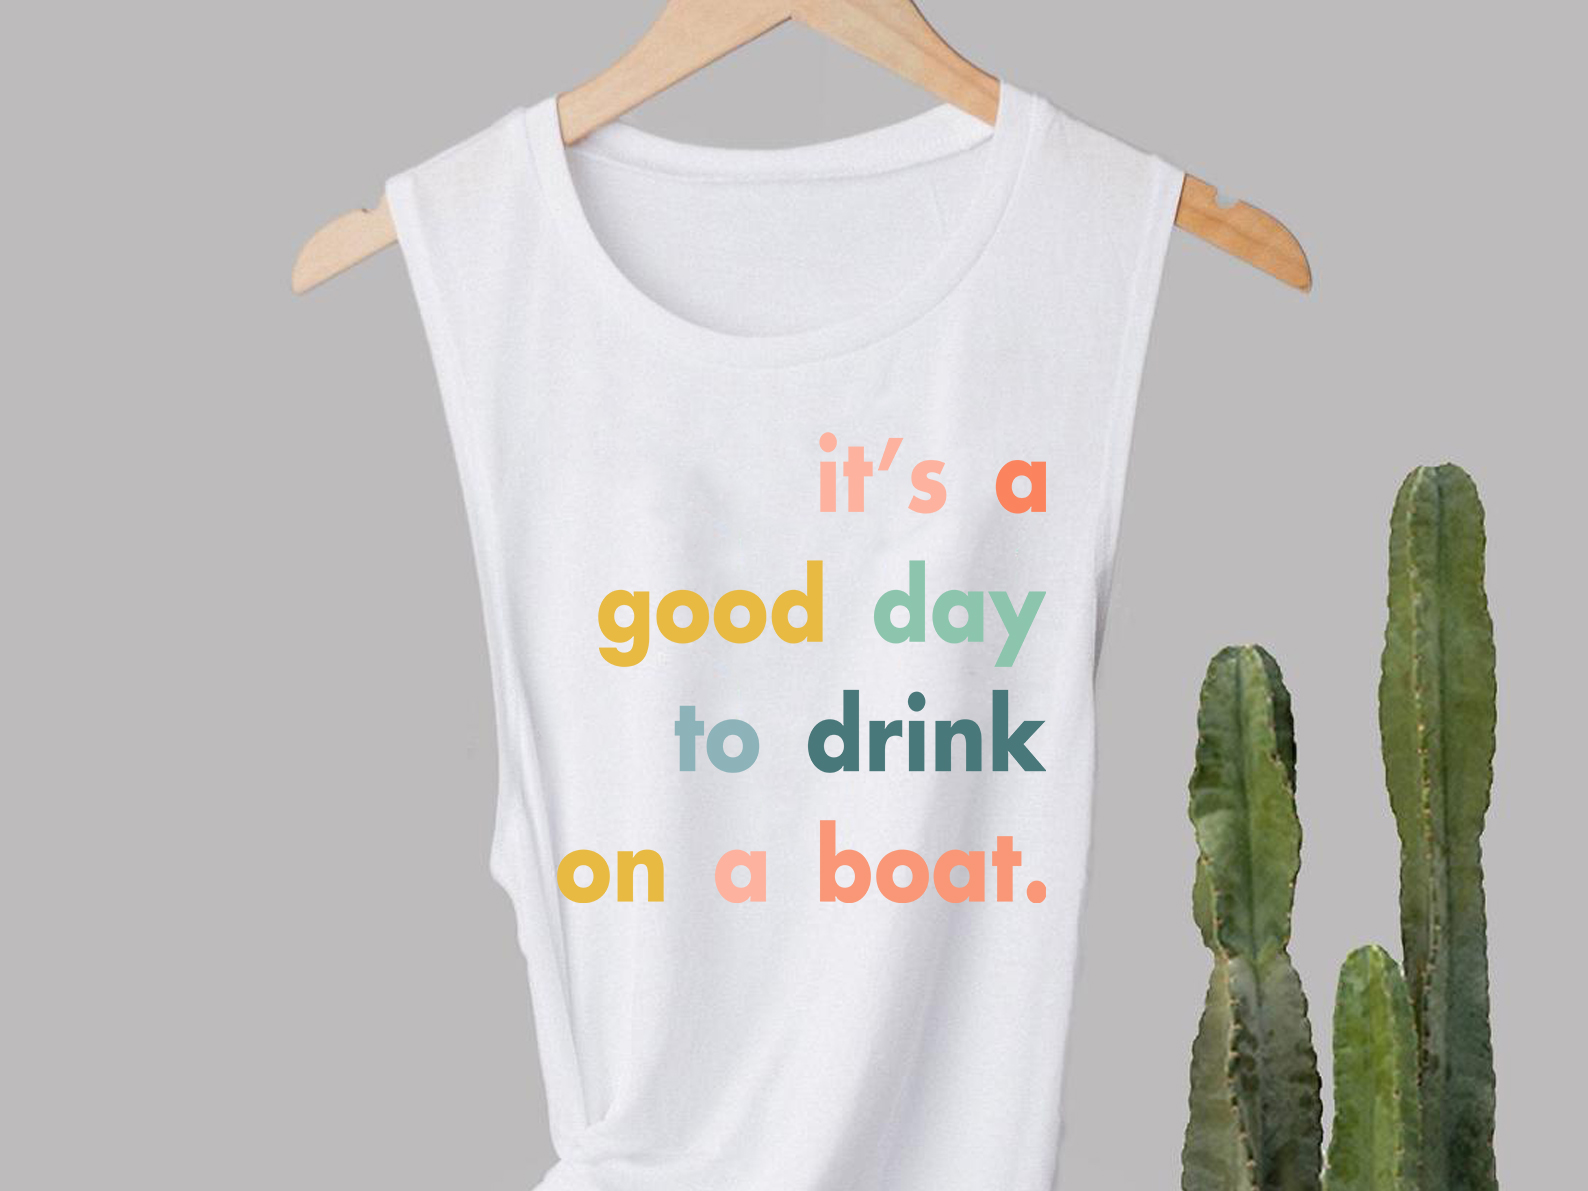 It's a good day to drink on a boat